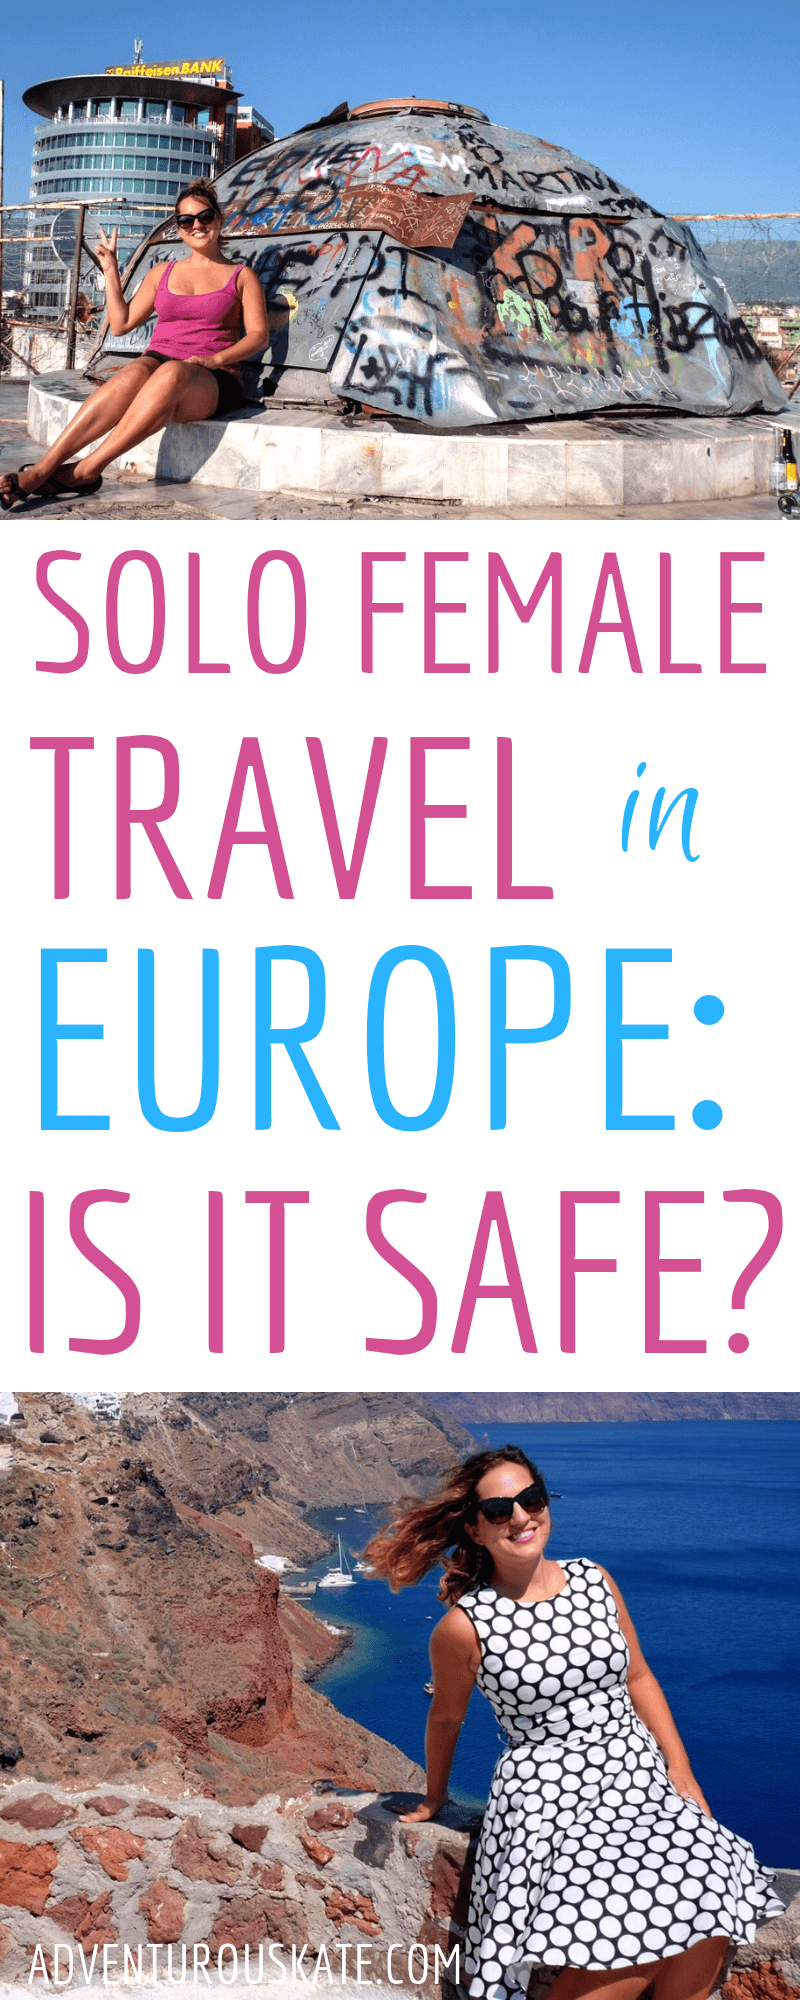 solo female travel europe itinerary